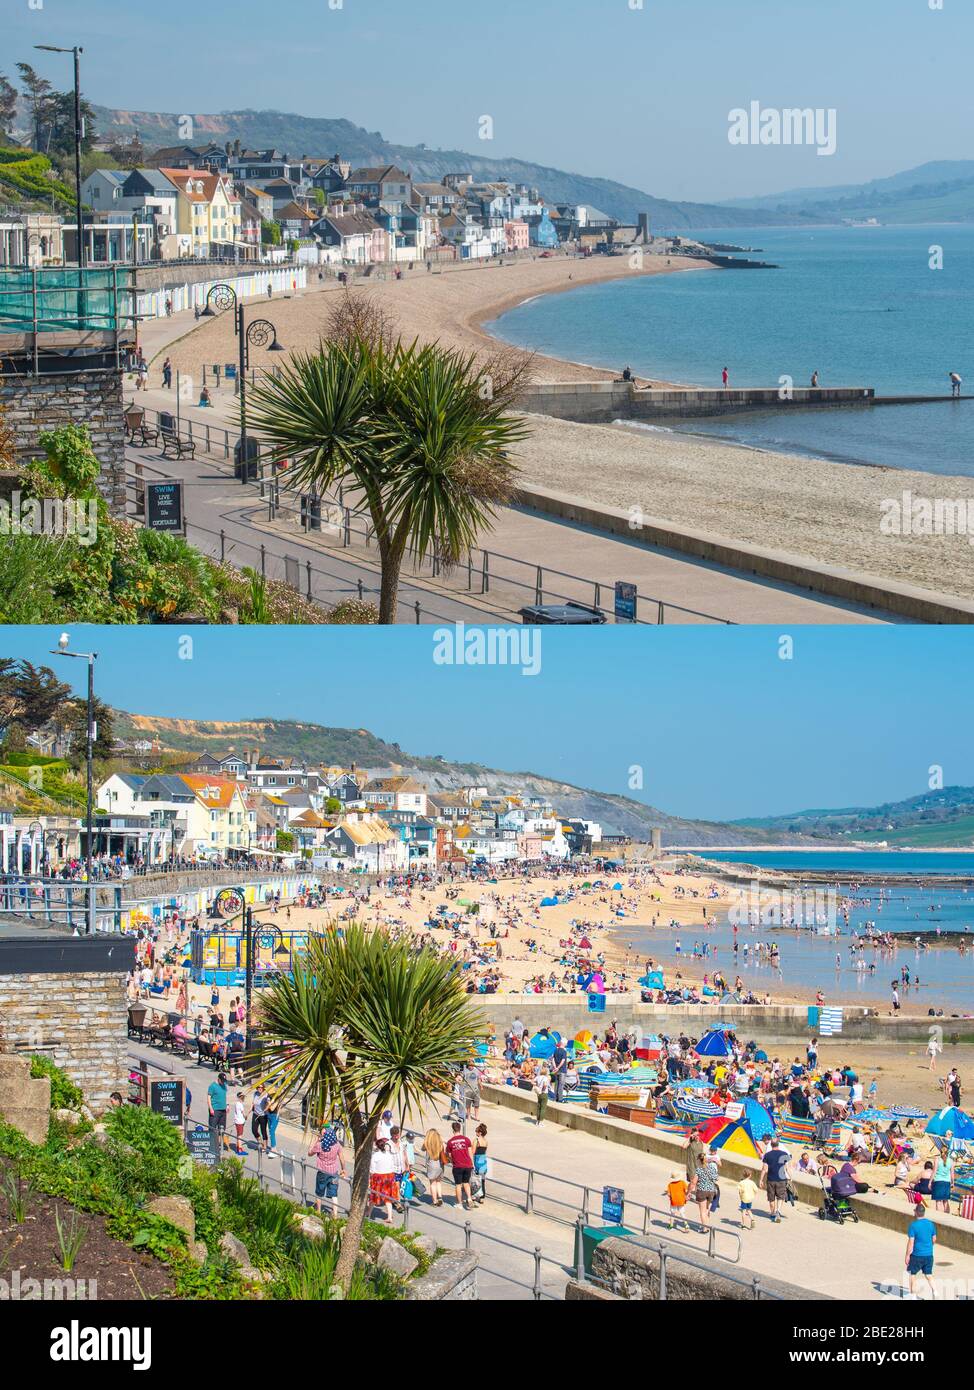 Lyme Regis, Dorset, UK. 11th Apr, 2020. UK Weather: Lyme Regis, Dorset, UK. View of Lyme Regis on a gloriously sunny Easter Saturday 2019 and a similarly beautiful Easter Saturday 2020. The COVID-19 pandemic restrictions are hitting the tourist industry hard in the town and across the South West as visitors and tourists follow Government insturctions to 'stay at home, protect the NHS, and save lives' during coronavirus outbreak. Credit: Celia McMahon/Alamy Live News Stock Photo